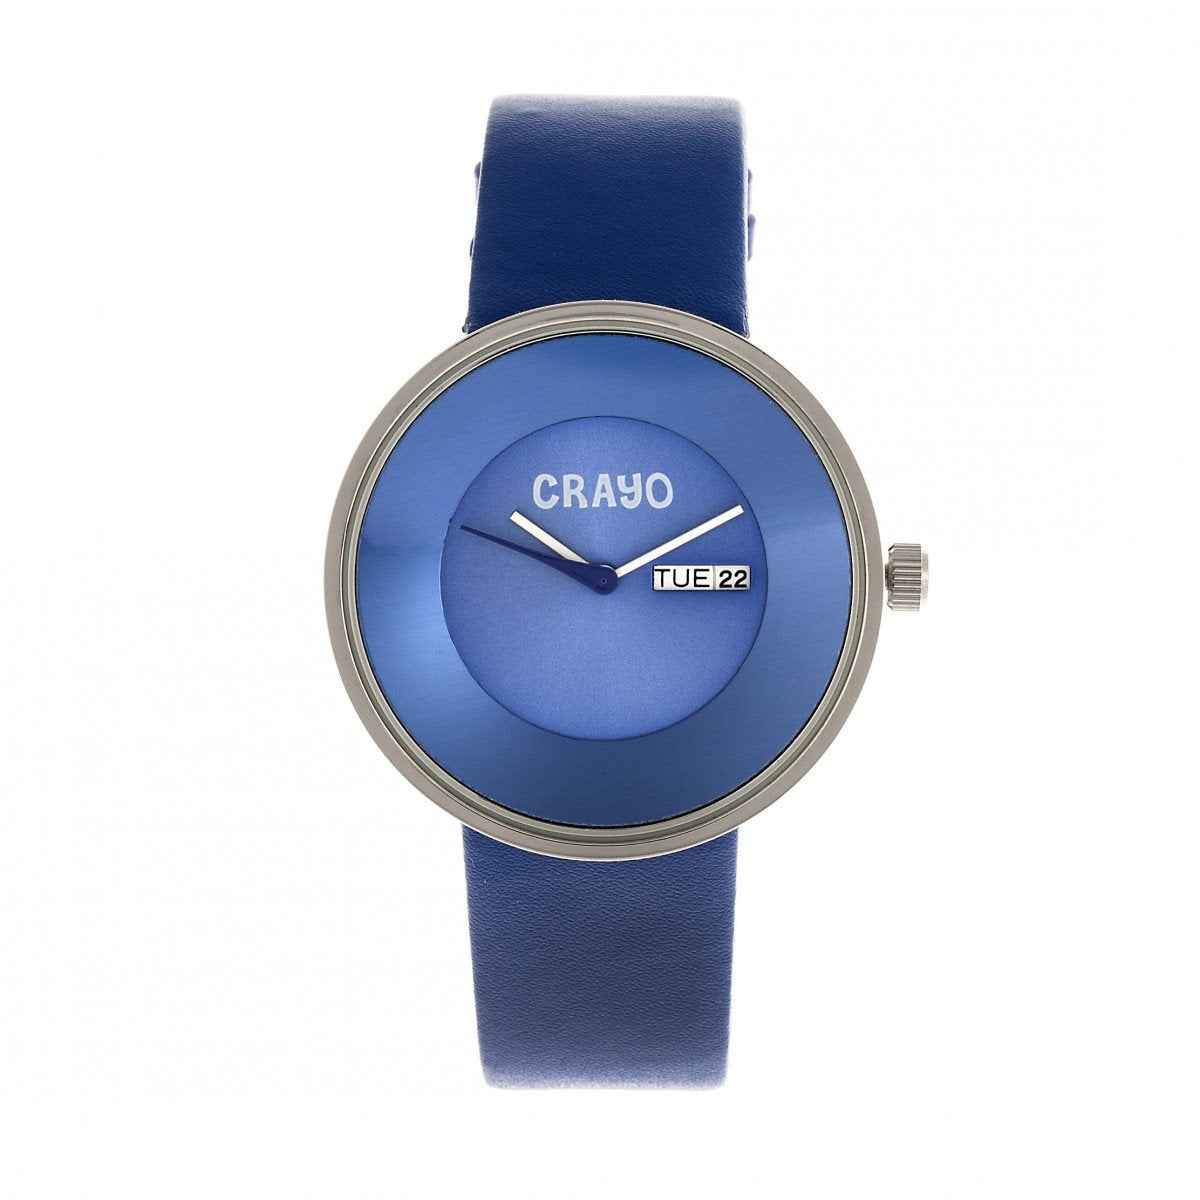 Crayo Button Leather-Band Unisex Watch w/ Day/Date - Blue - CRACR0202